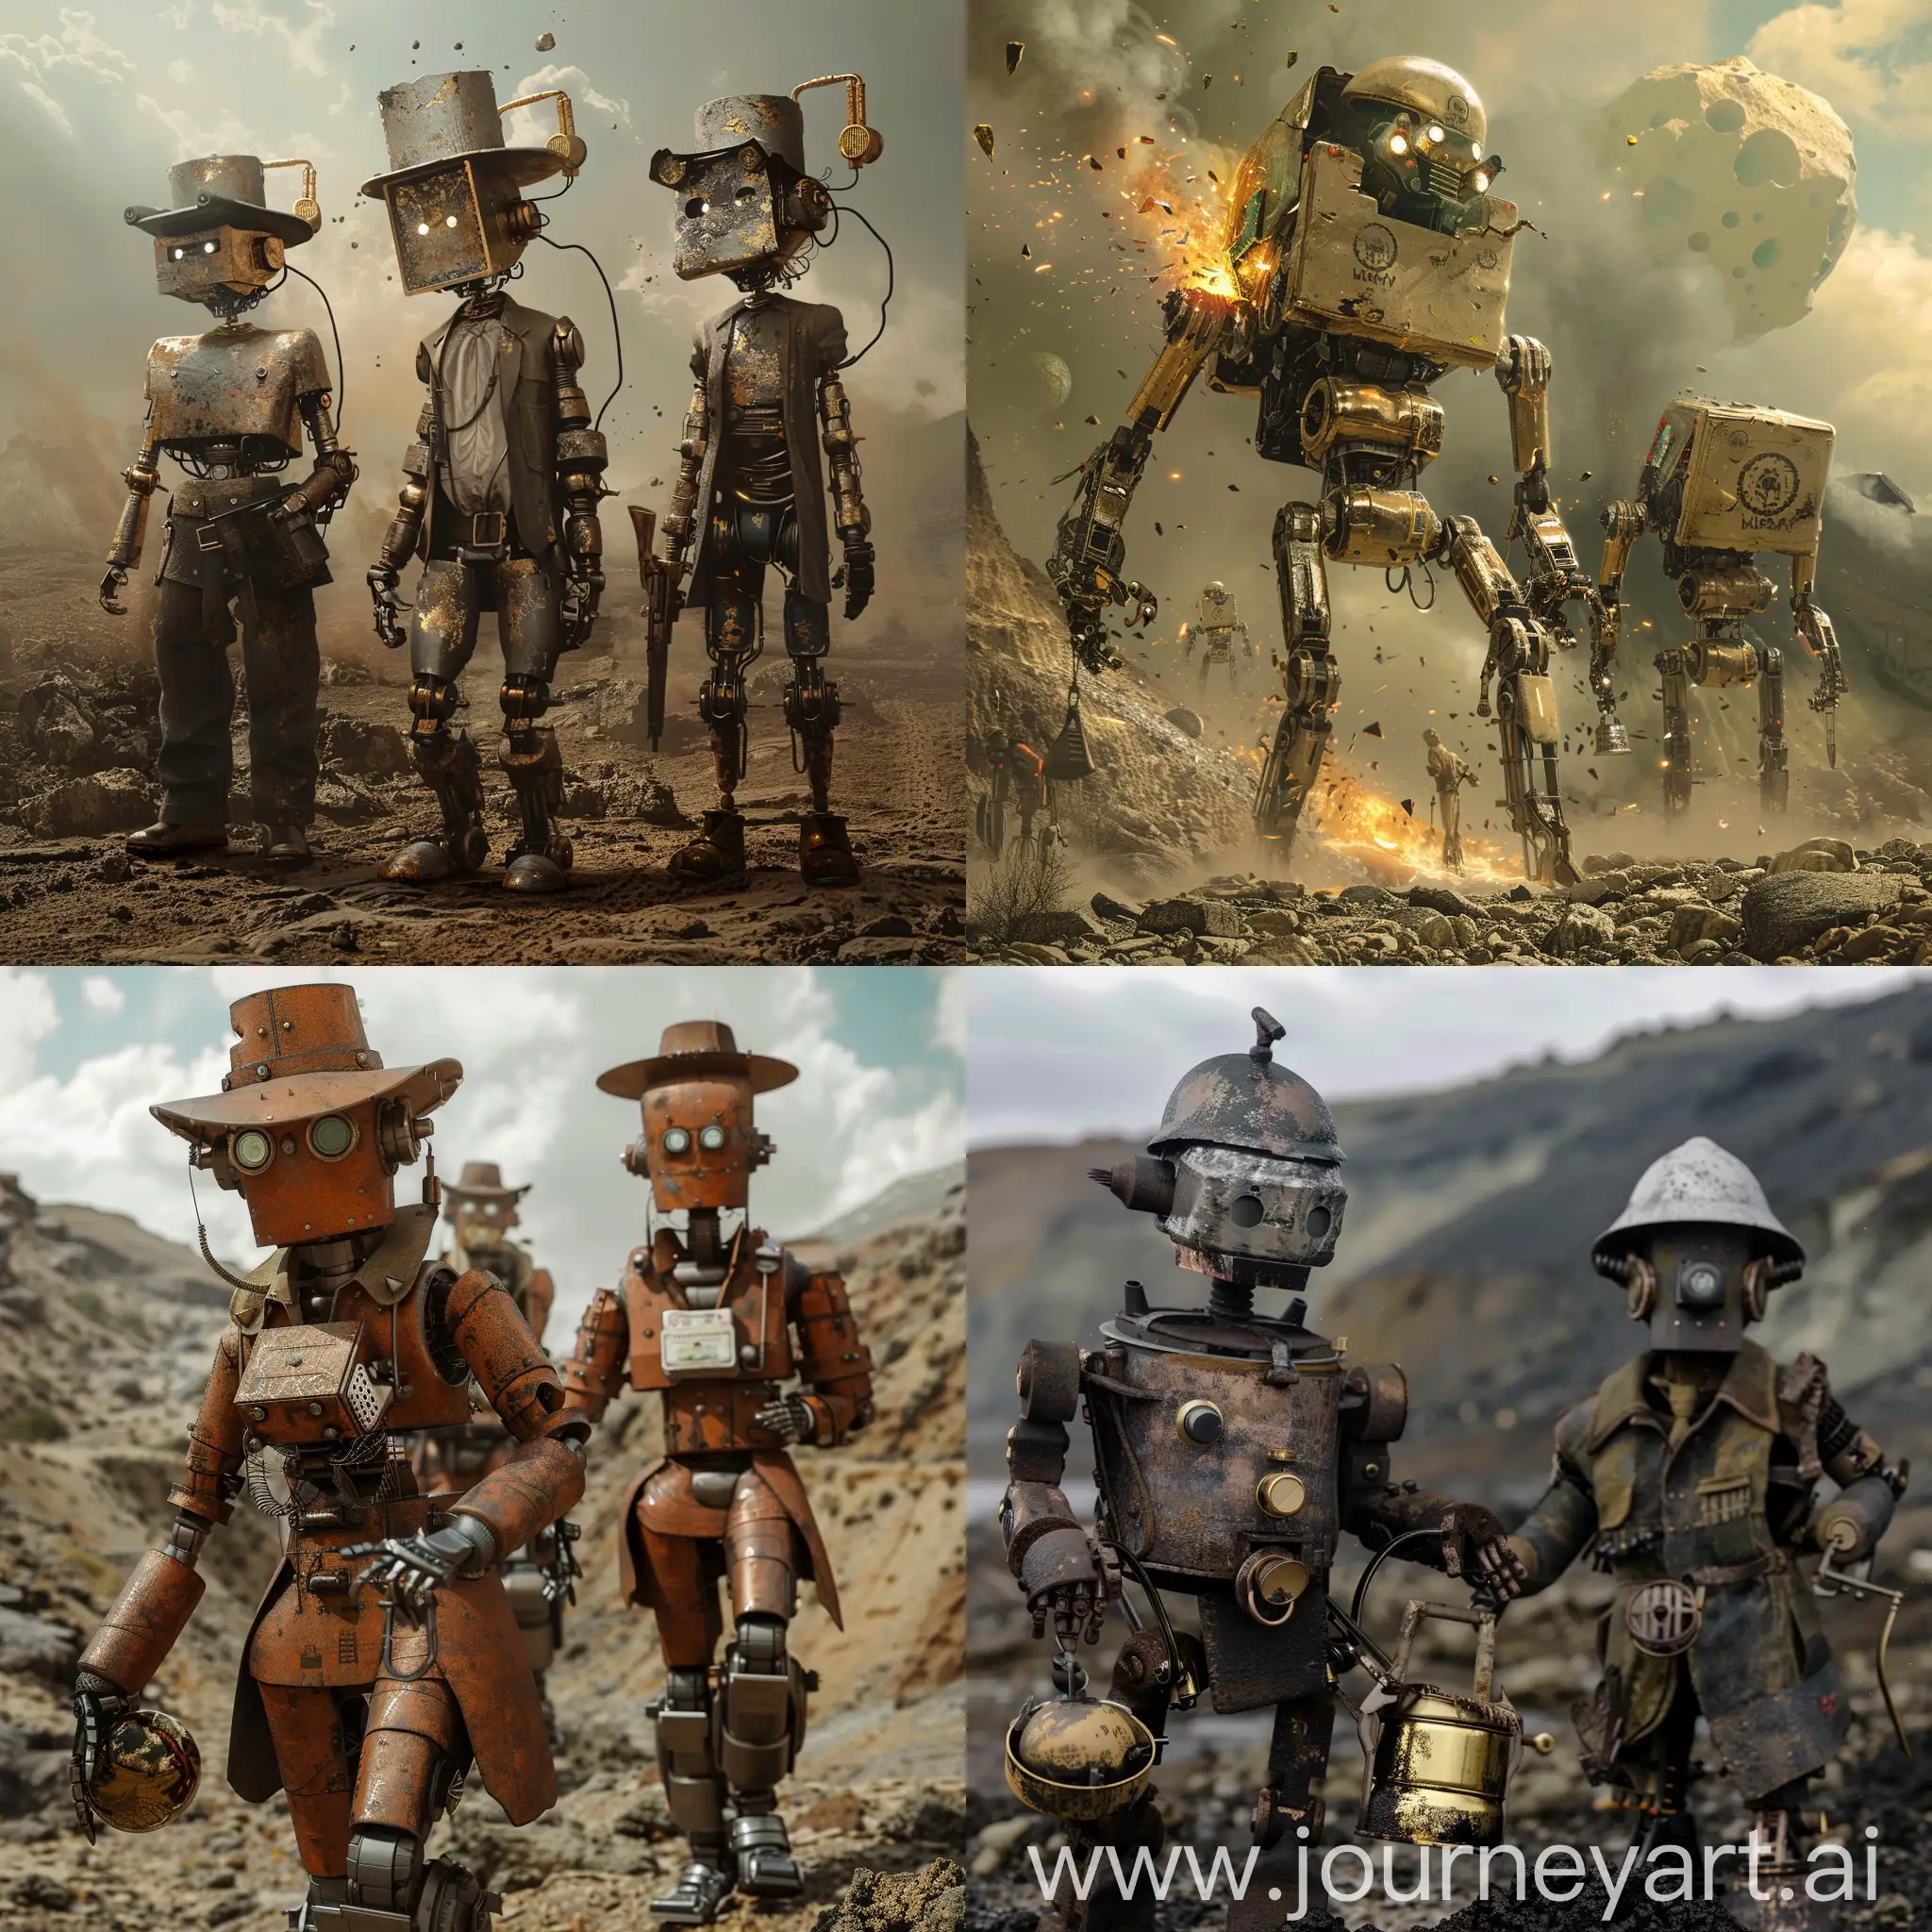 Robotic-Miners-in-an-Alternate-Gold-Rush-Universe